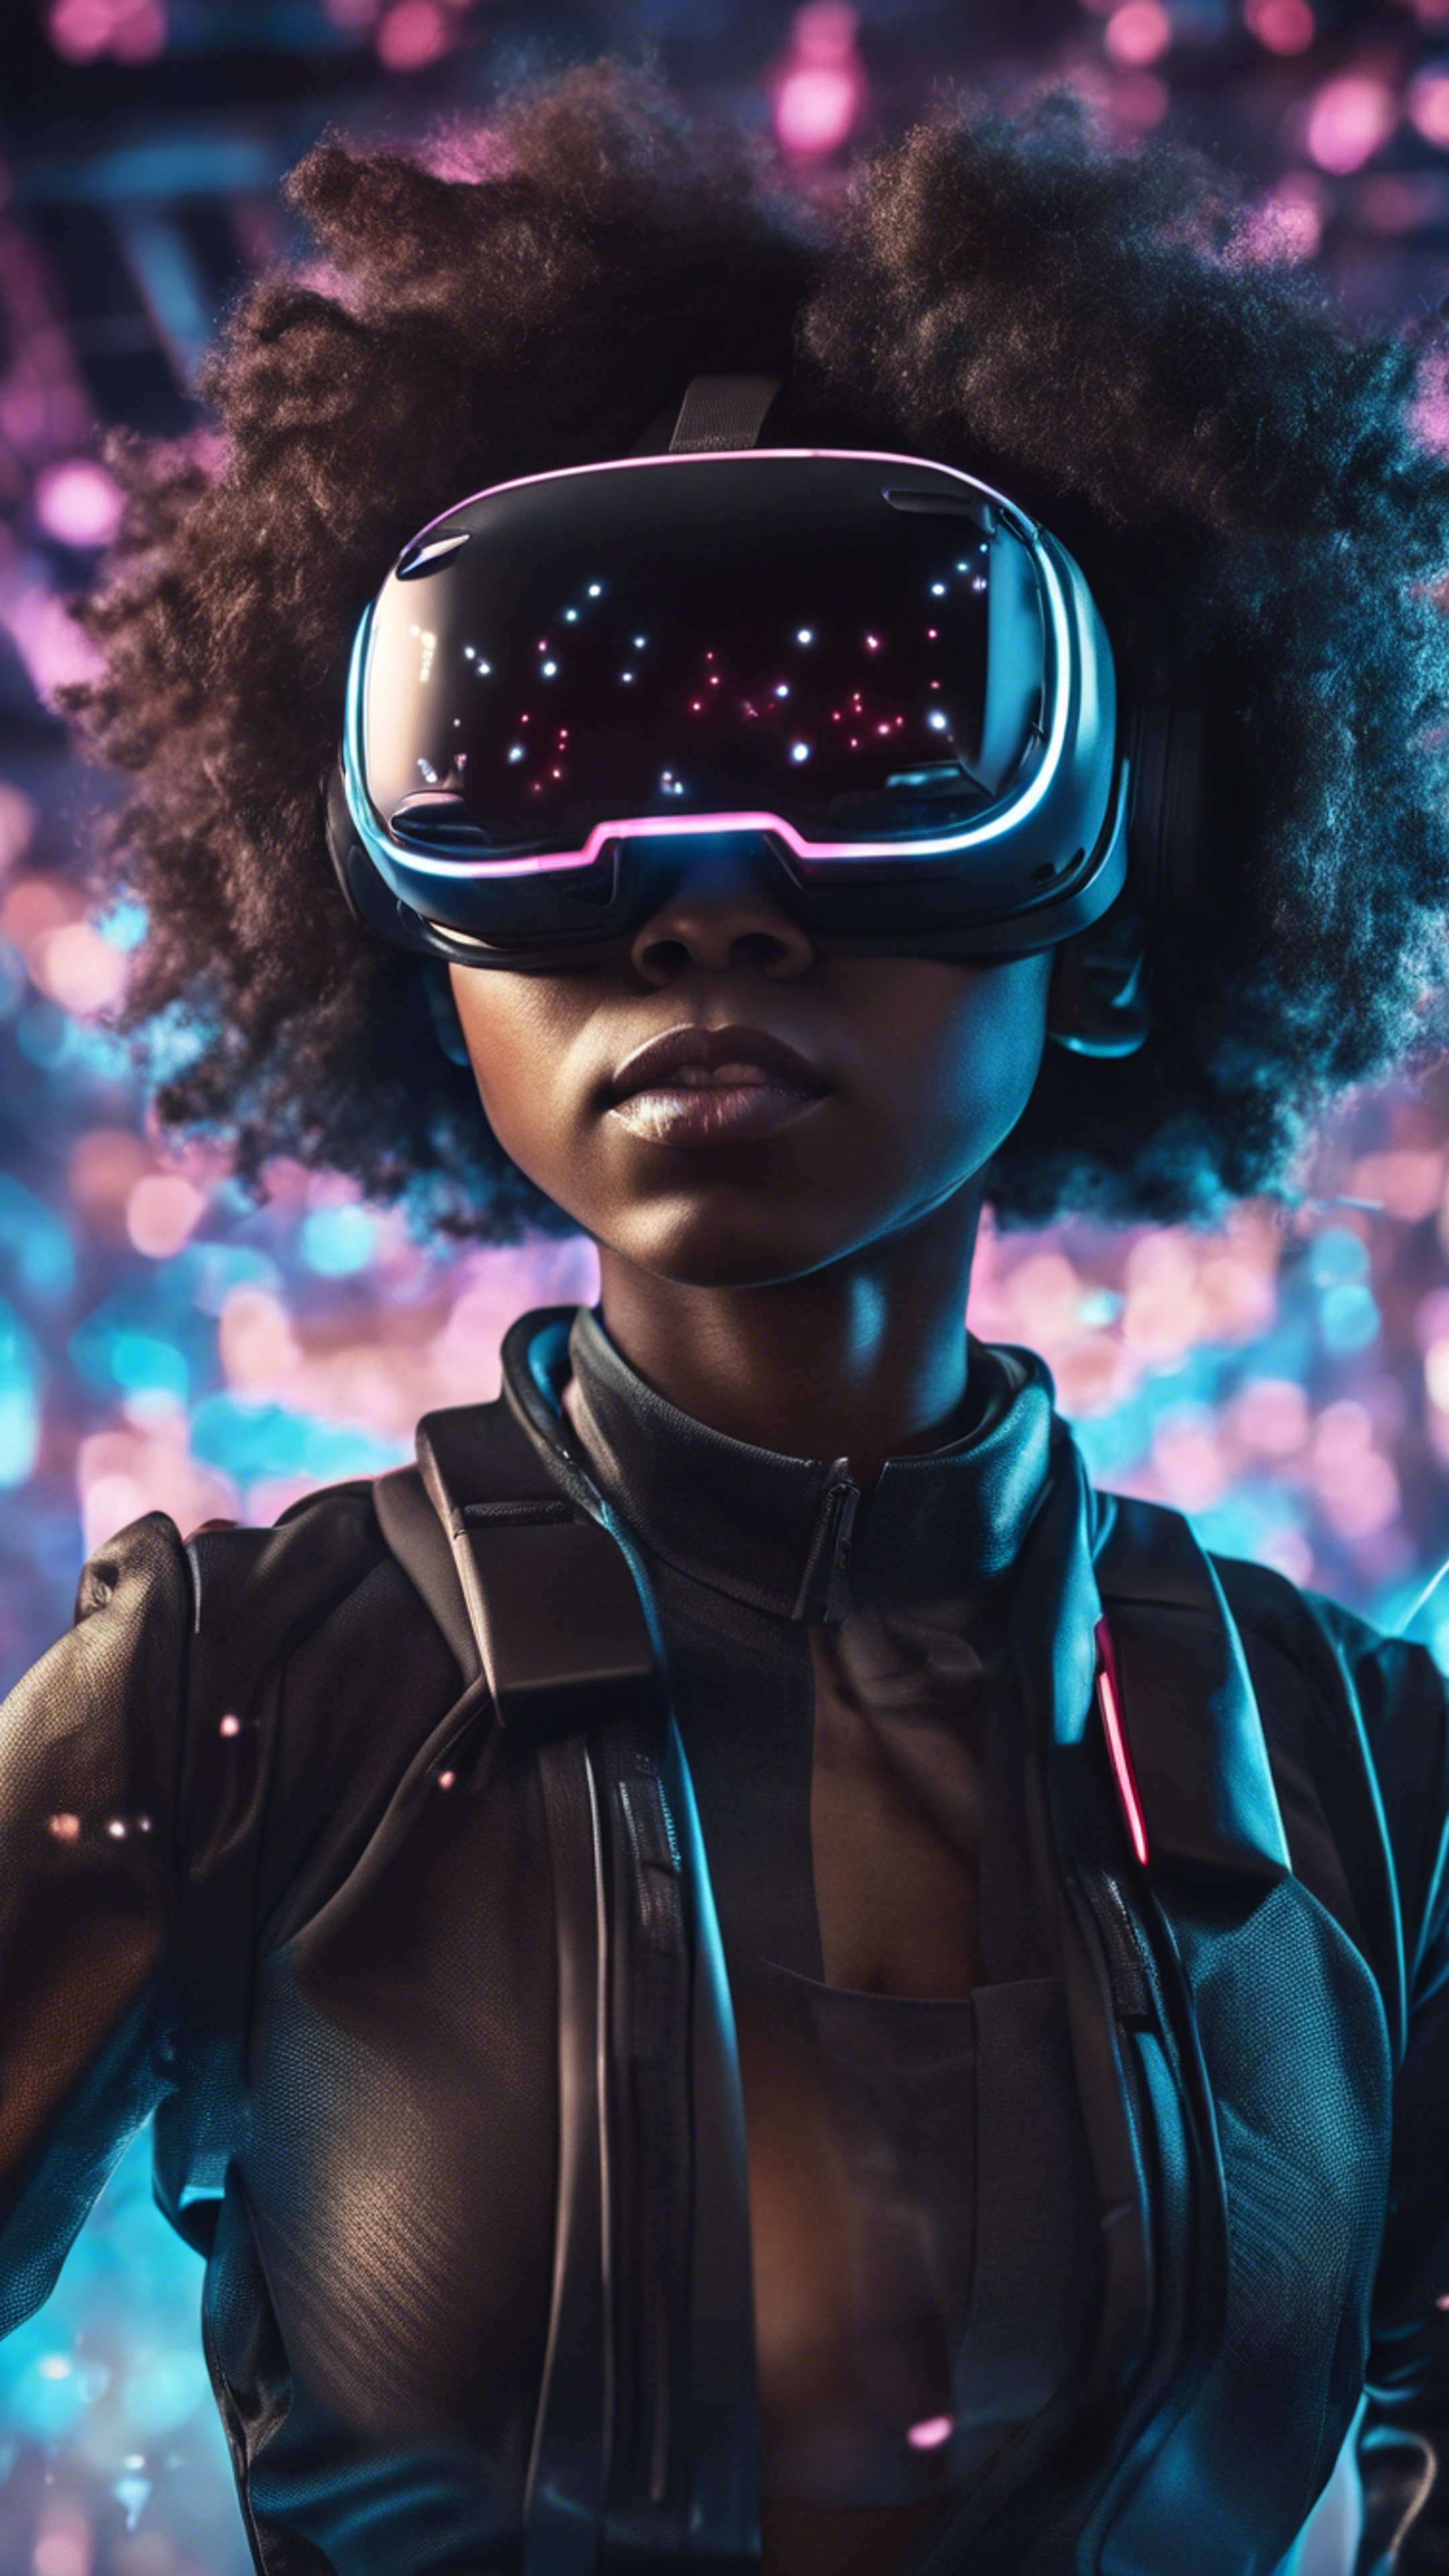 A black girl wearing a virtual reality headset completely immersed in a futuristic cyberspace. Tapéta[0f80f55163a8478e8707]